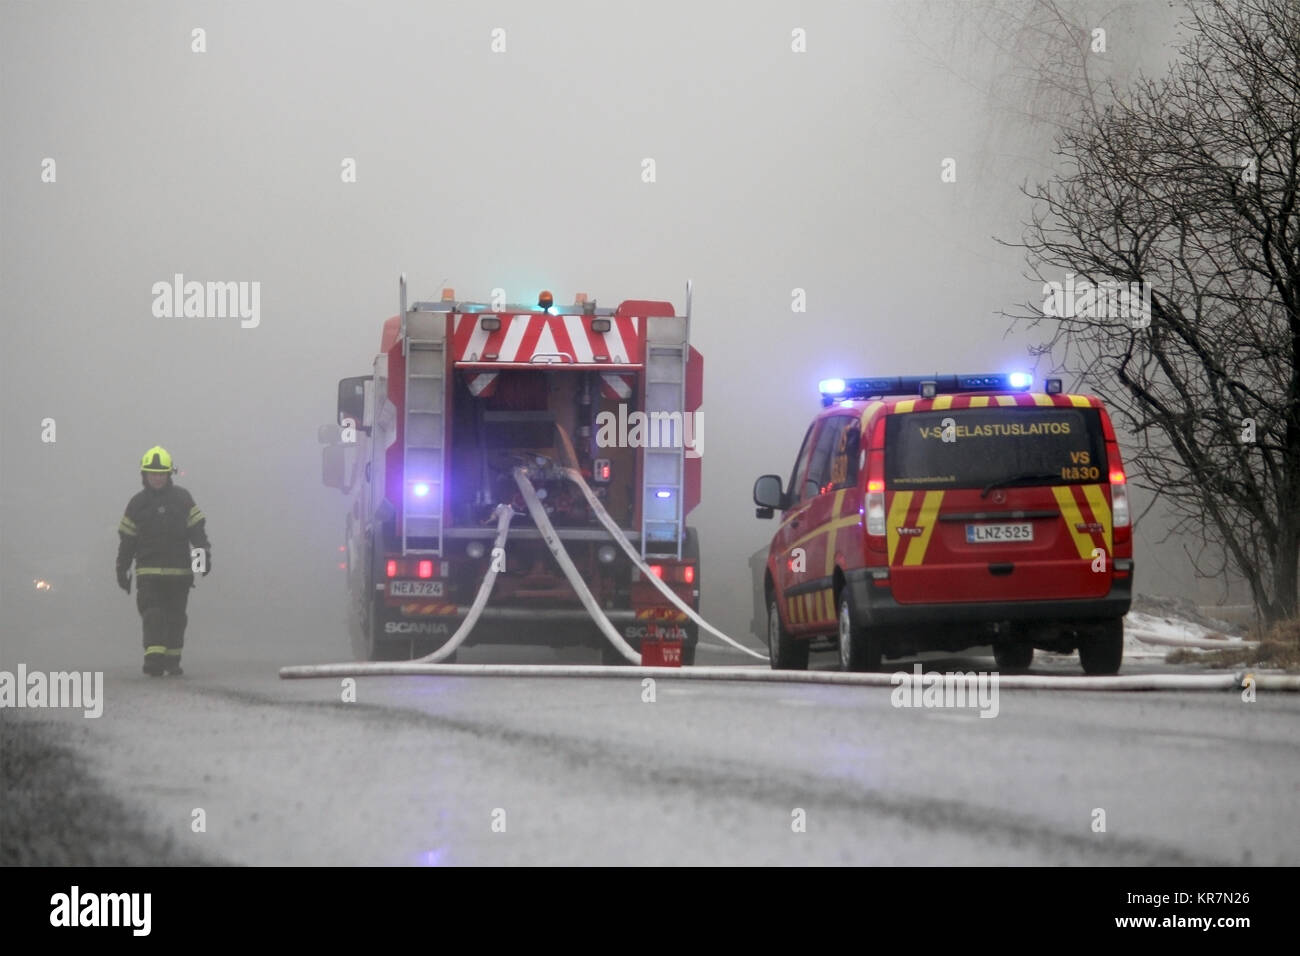 SALO, FINLAND - FEBRUARY 16, 2014: Firefighter emerges from heavy smoke at the fire scene of Salo Cement Plant. Stock Photo